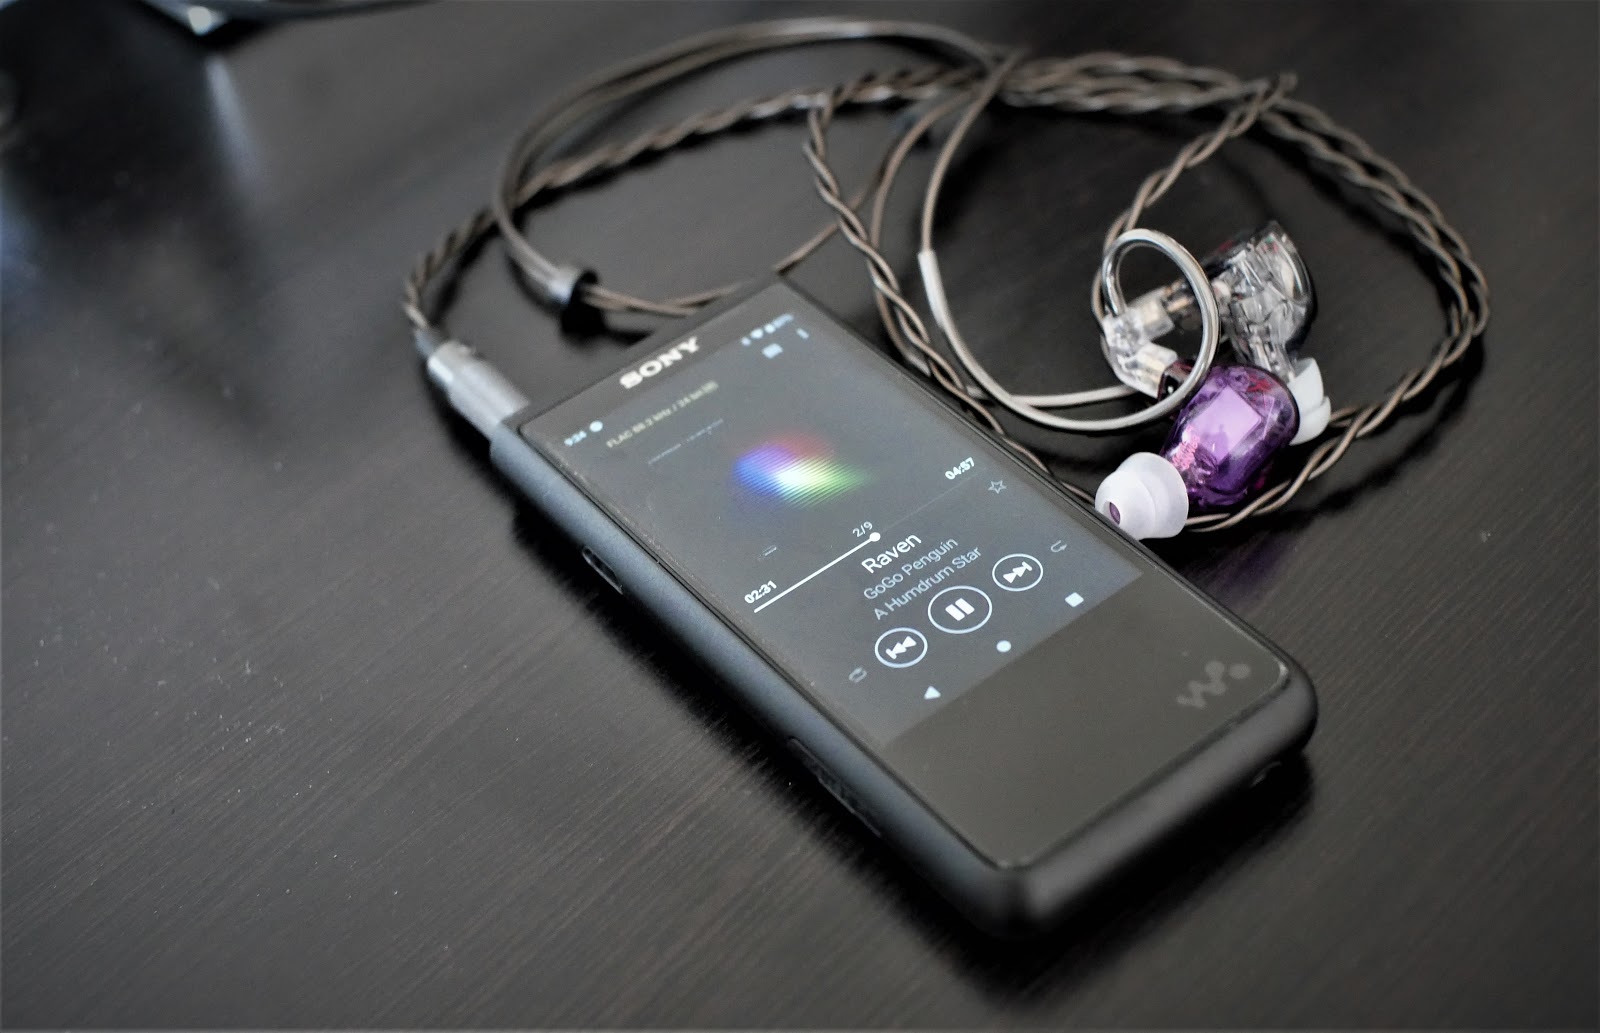 Sony NW-ZX507 Digital Audio Player Review